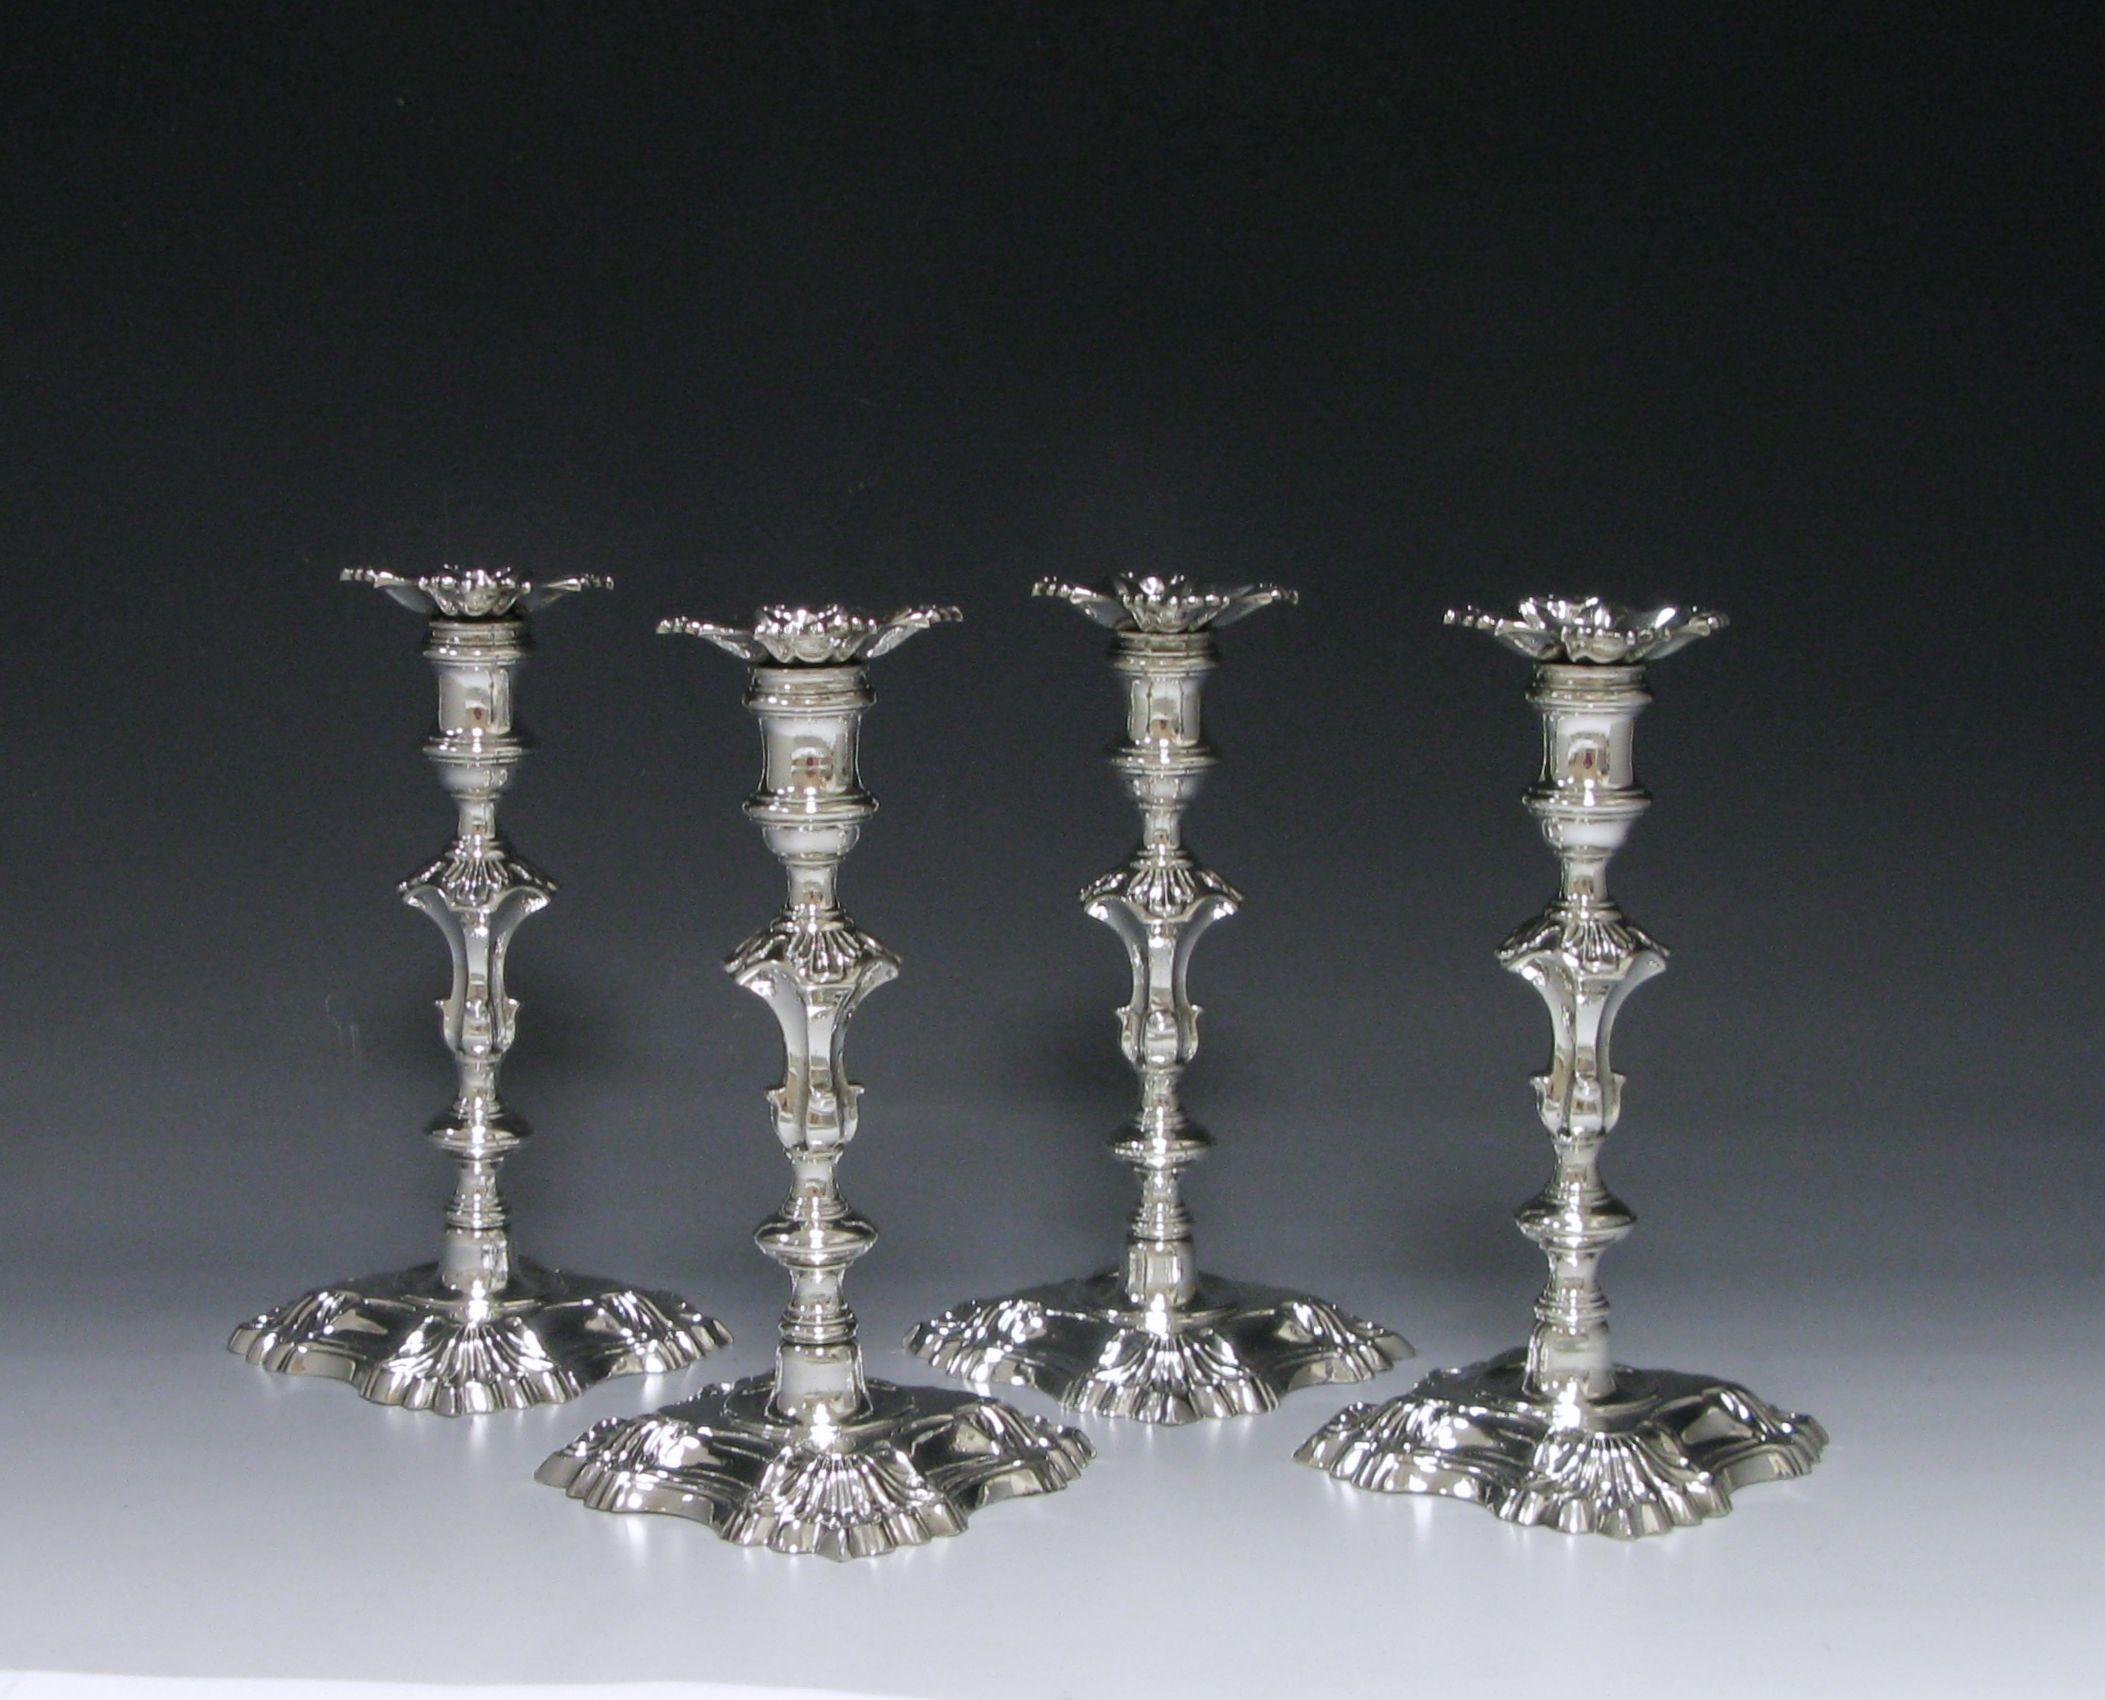 A superb set of George II antique silver cast candlesticks. The knopped baluster formed stems lead to reeded spool –shaped sconces tapering to acanthus embellished shoulders. The conventional formed nozzles are detachable, lobed shaped and